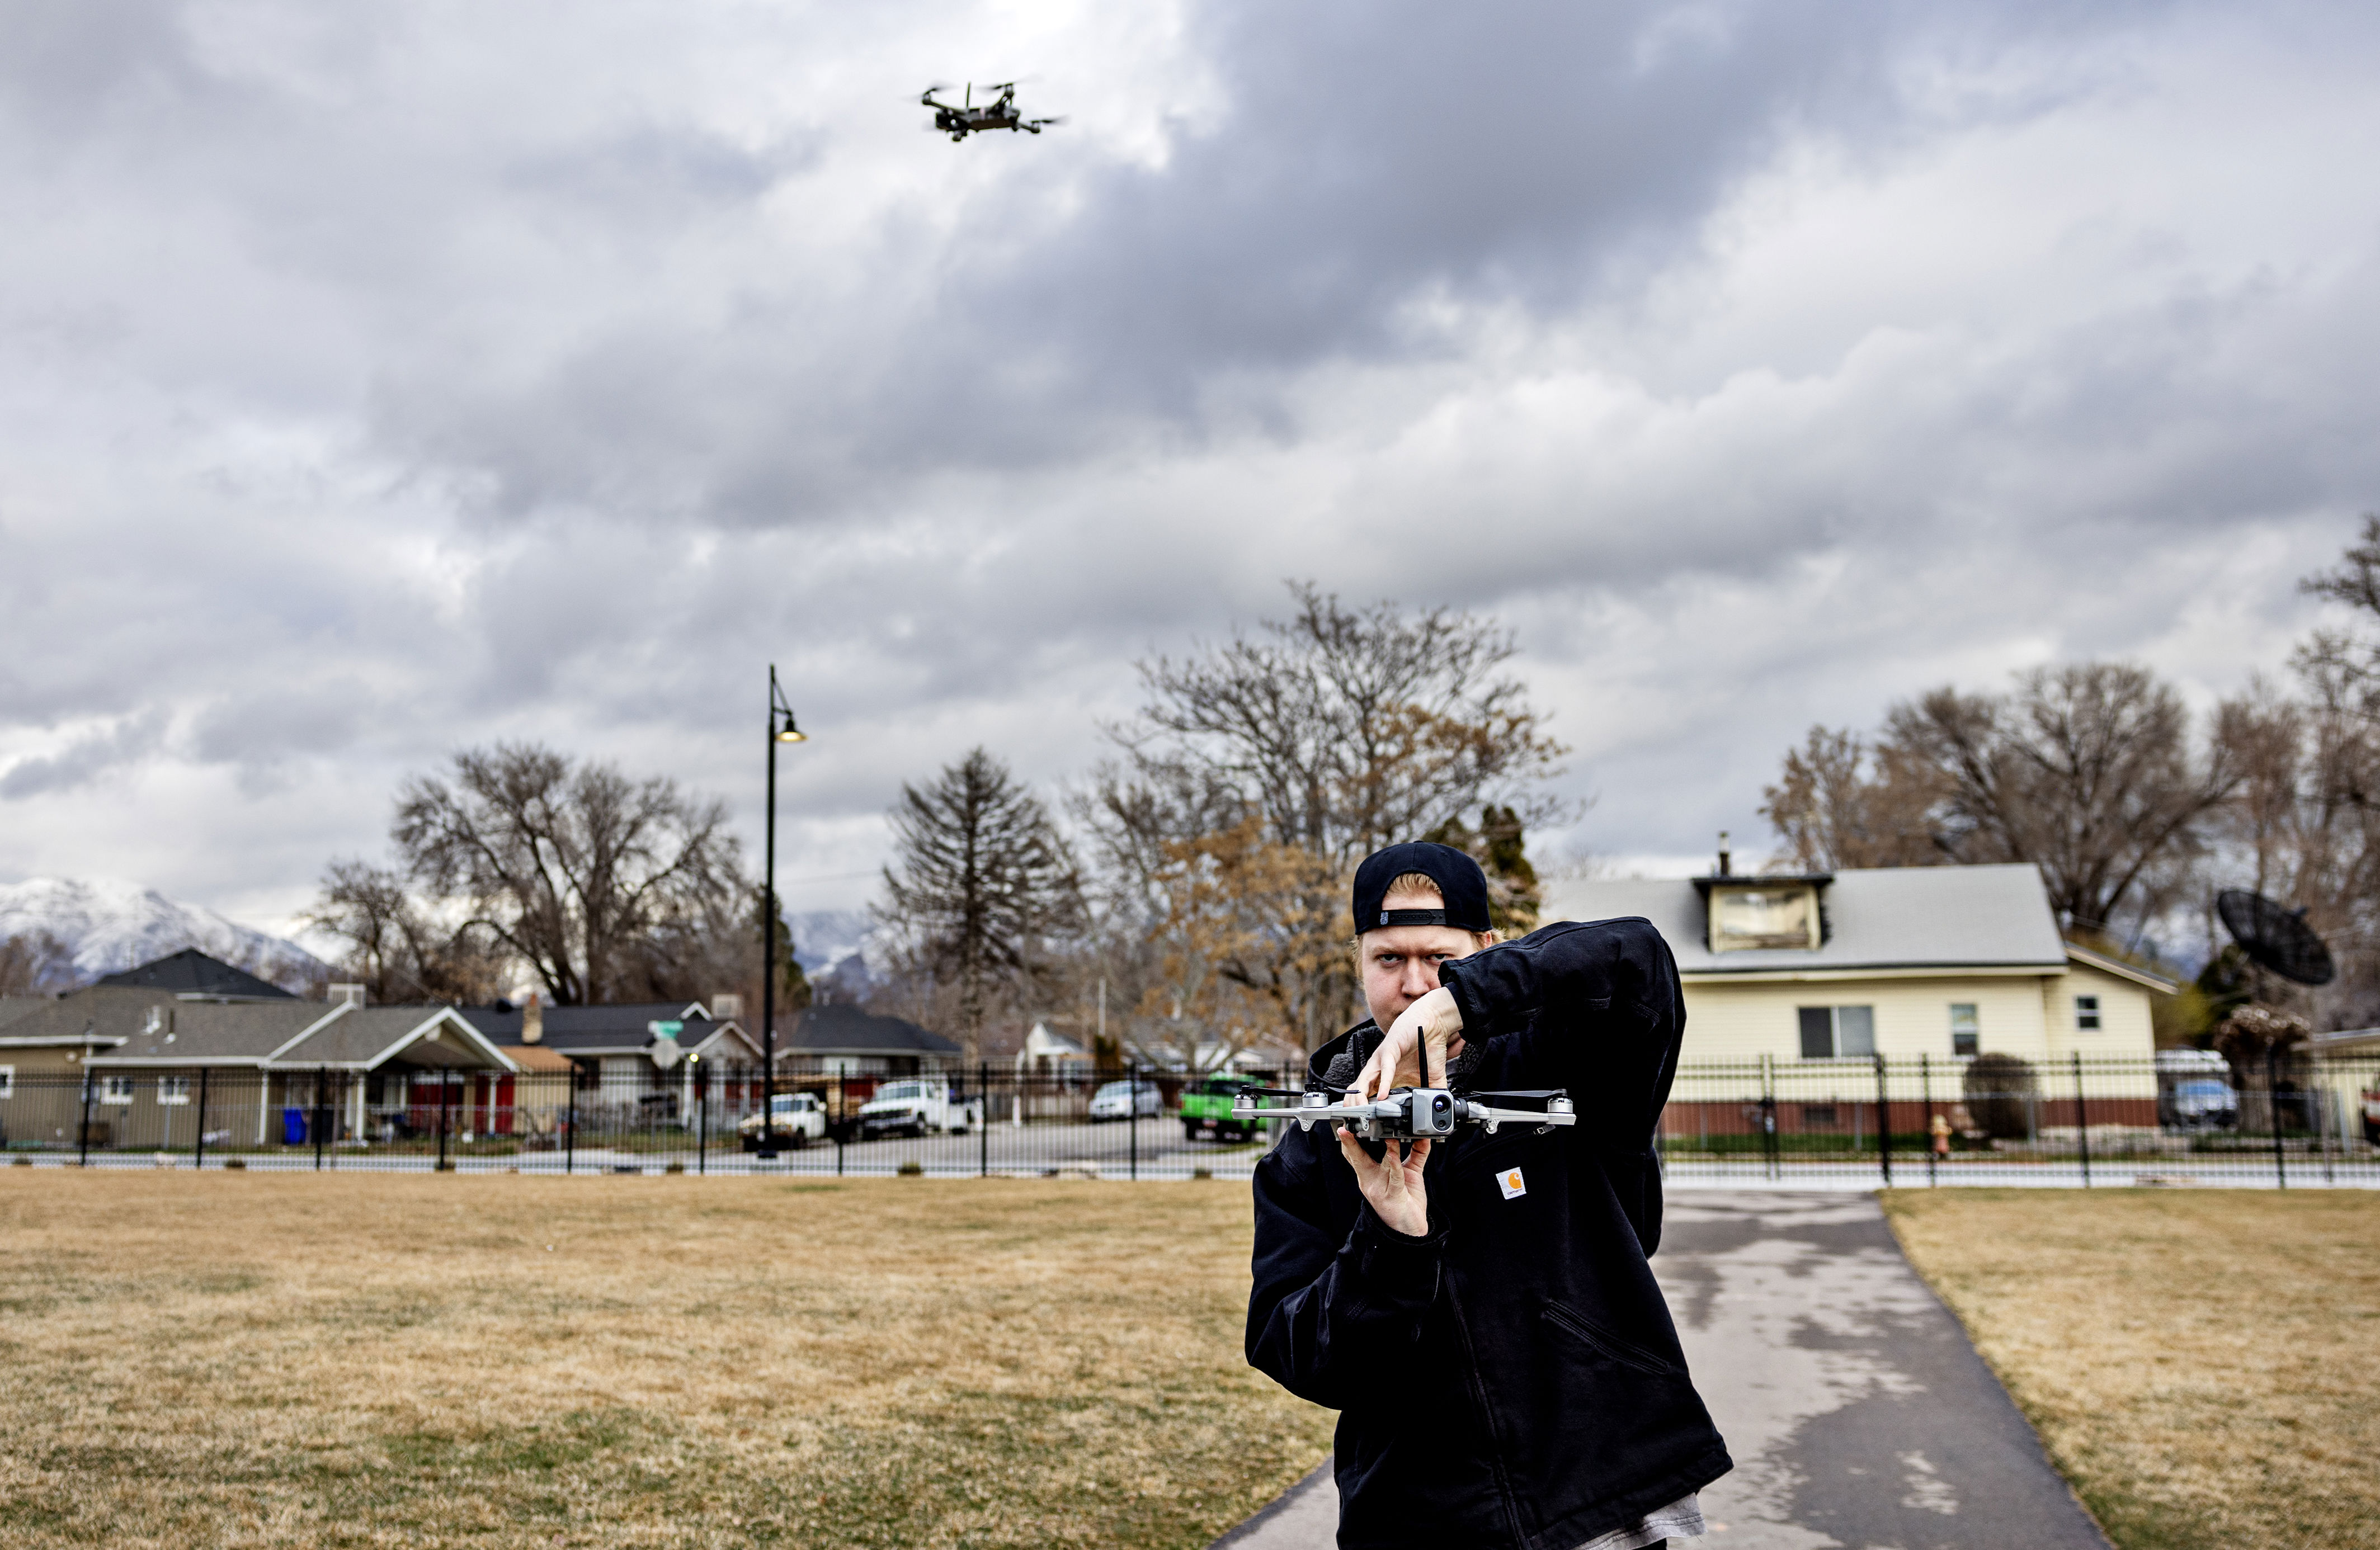 amazon, a drone factory in utah is at the epicenter of anti-china fervor